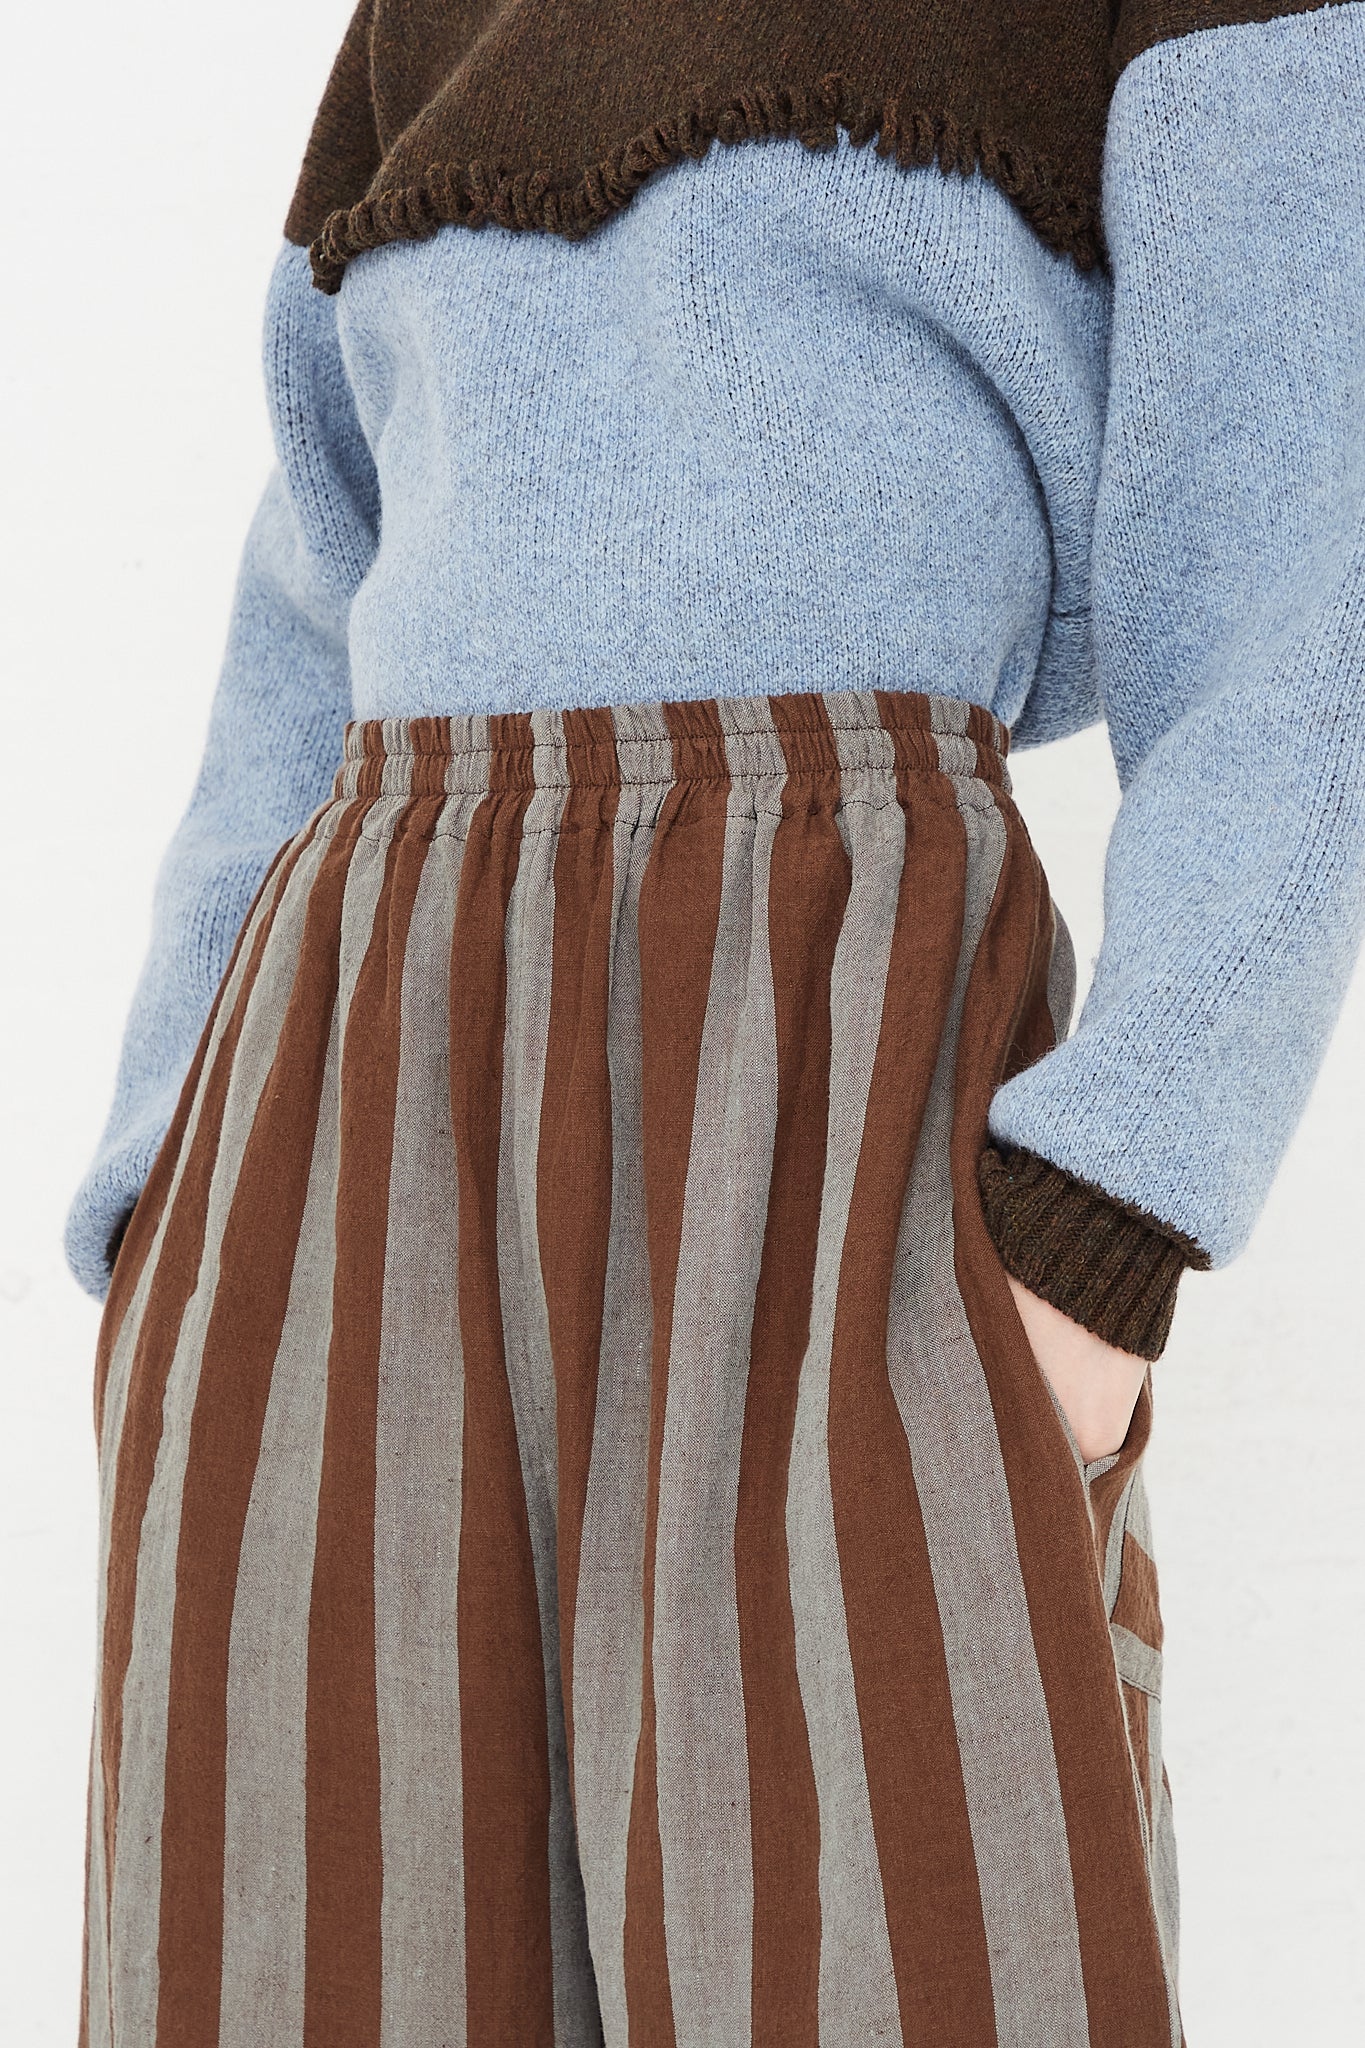 A model wearing a high waist trouser in a striped Irish linen. Brown and blue stripe. Features an elasticated waist and a wide straight leg. Front and upclose view of model highlighting pant details and sweater. Hands in pockets. Designed by Cawley - Oroboro Store